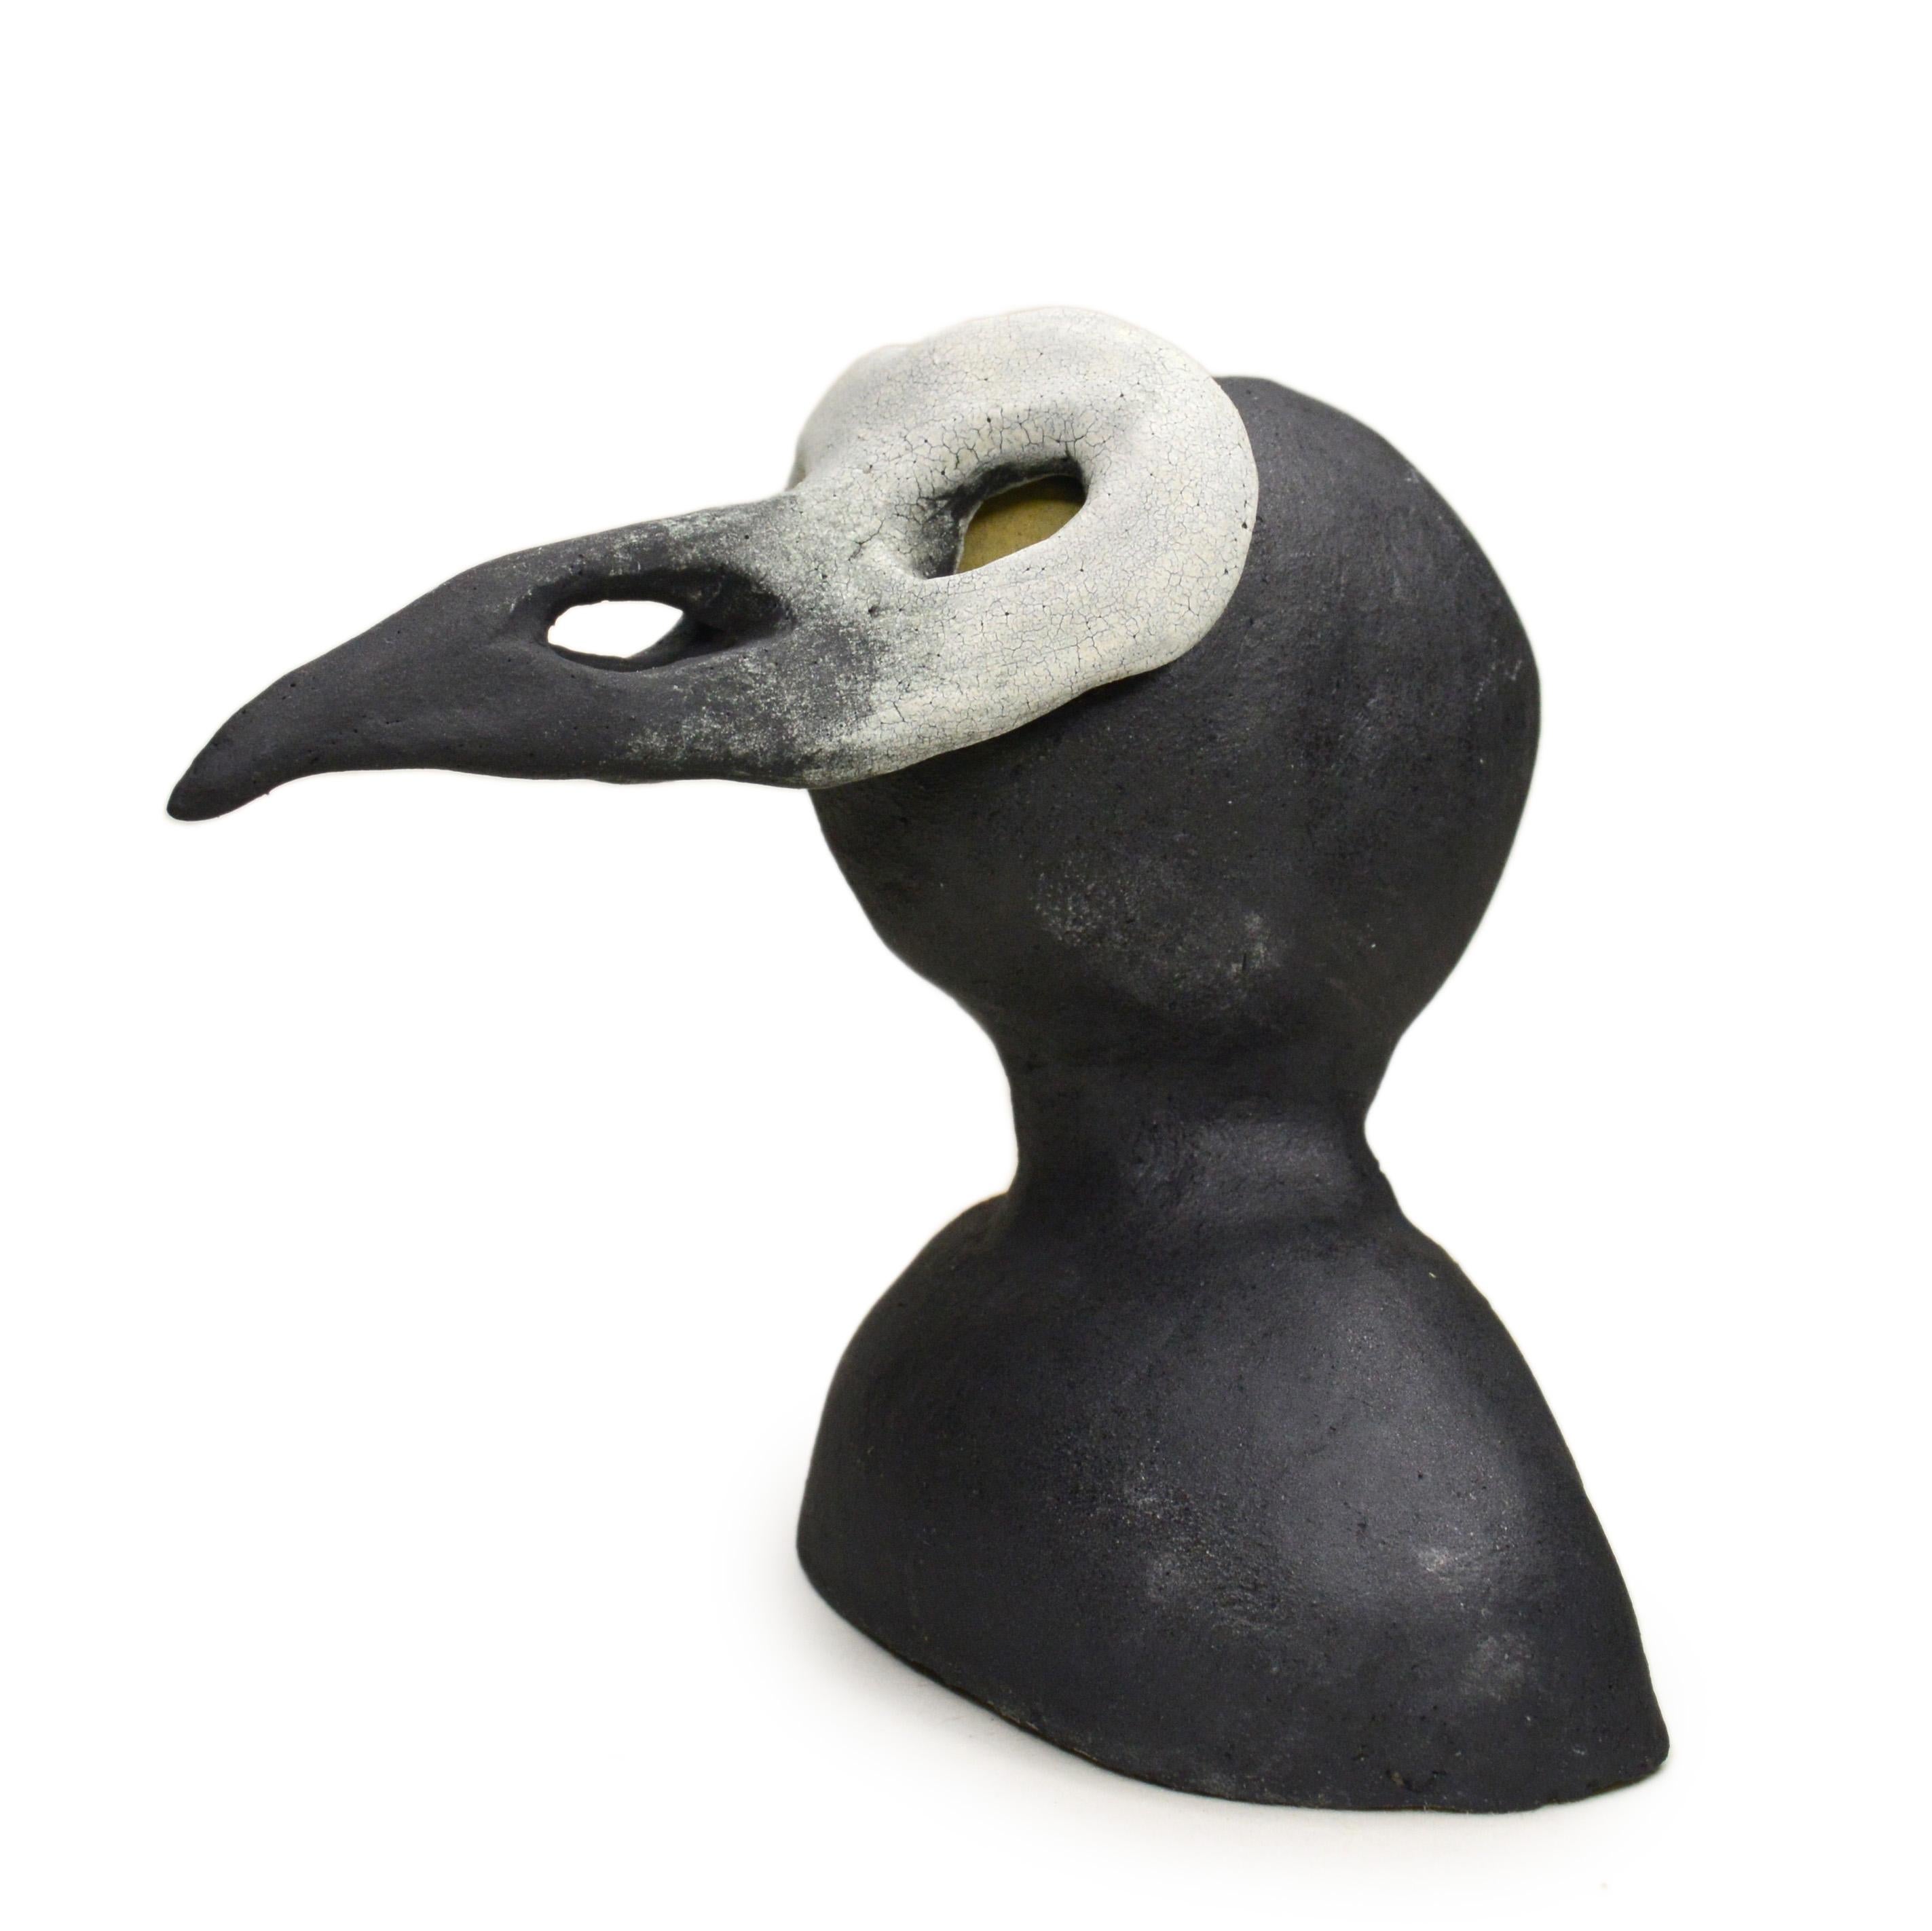 Pineco number 0014 Original Ceramic sculpture with crow mask representing: Intelligence, fierceness and adaptability.

Meet a variety of characters with distinct masks and postures. These sculptures are fascinating and make you curious, encouraging